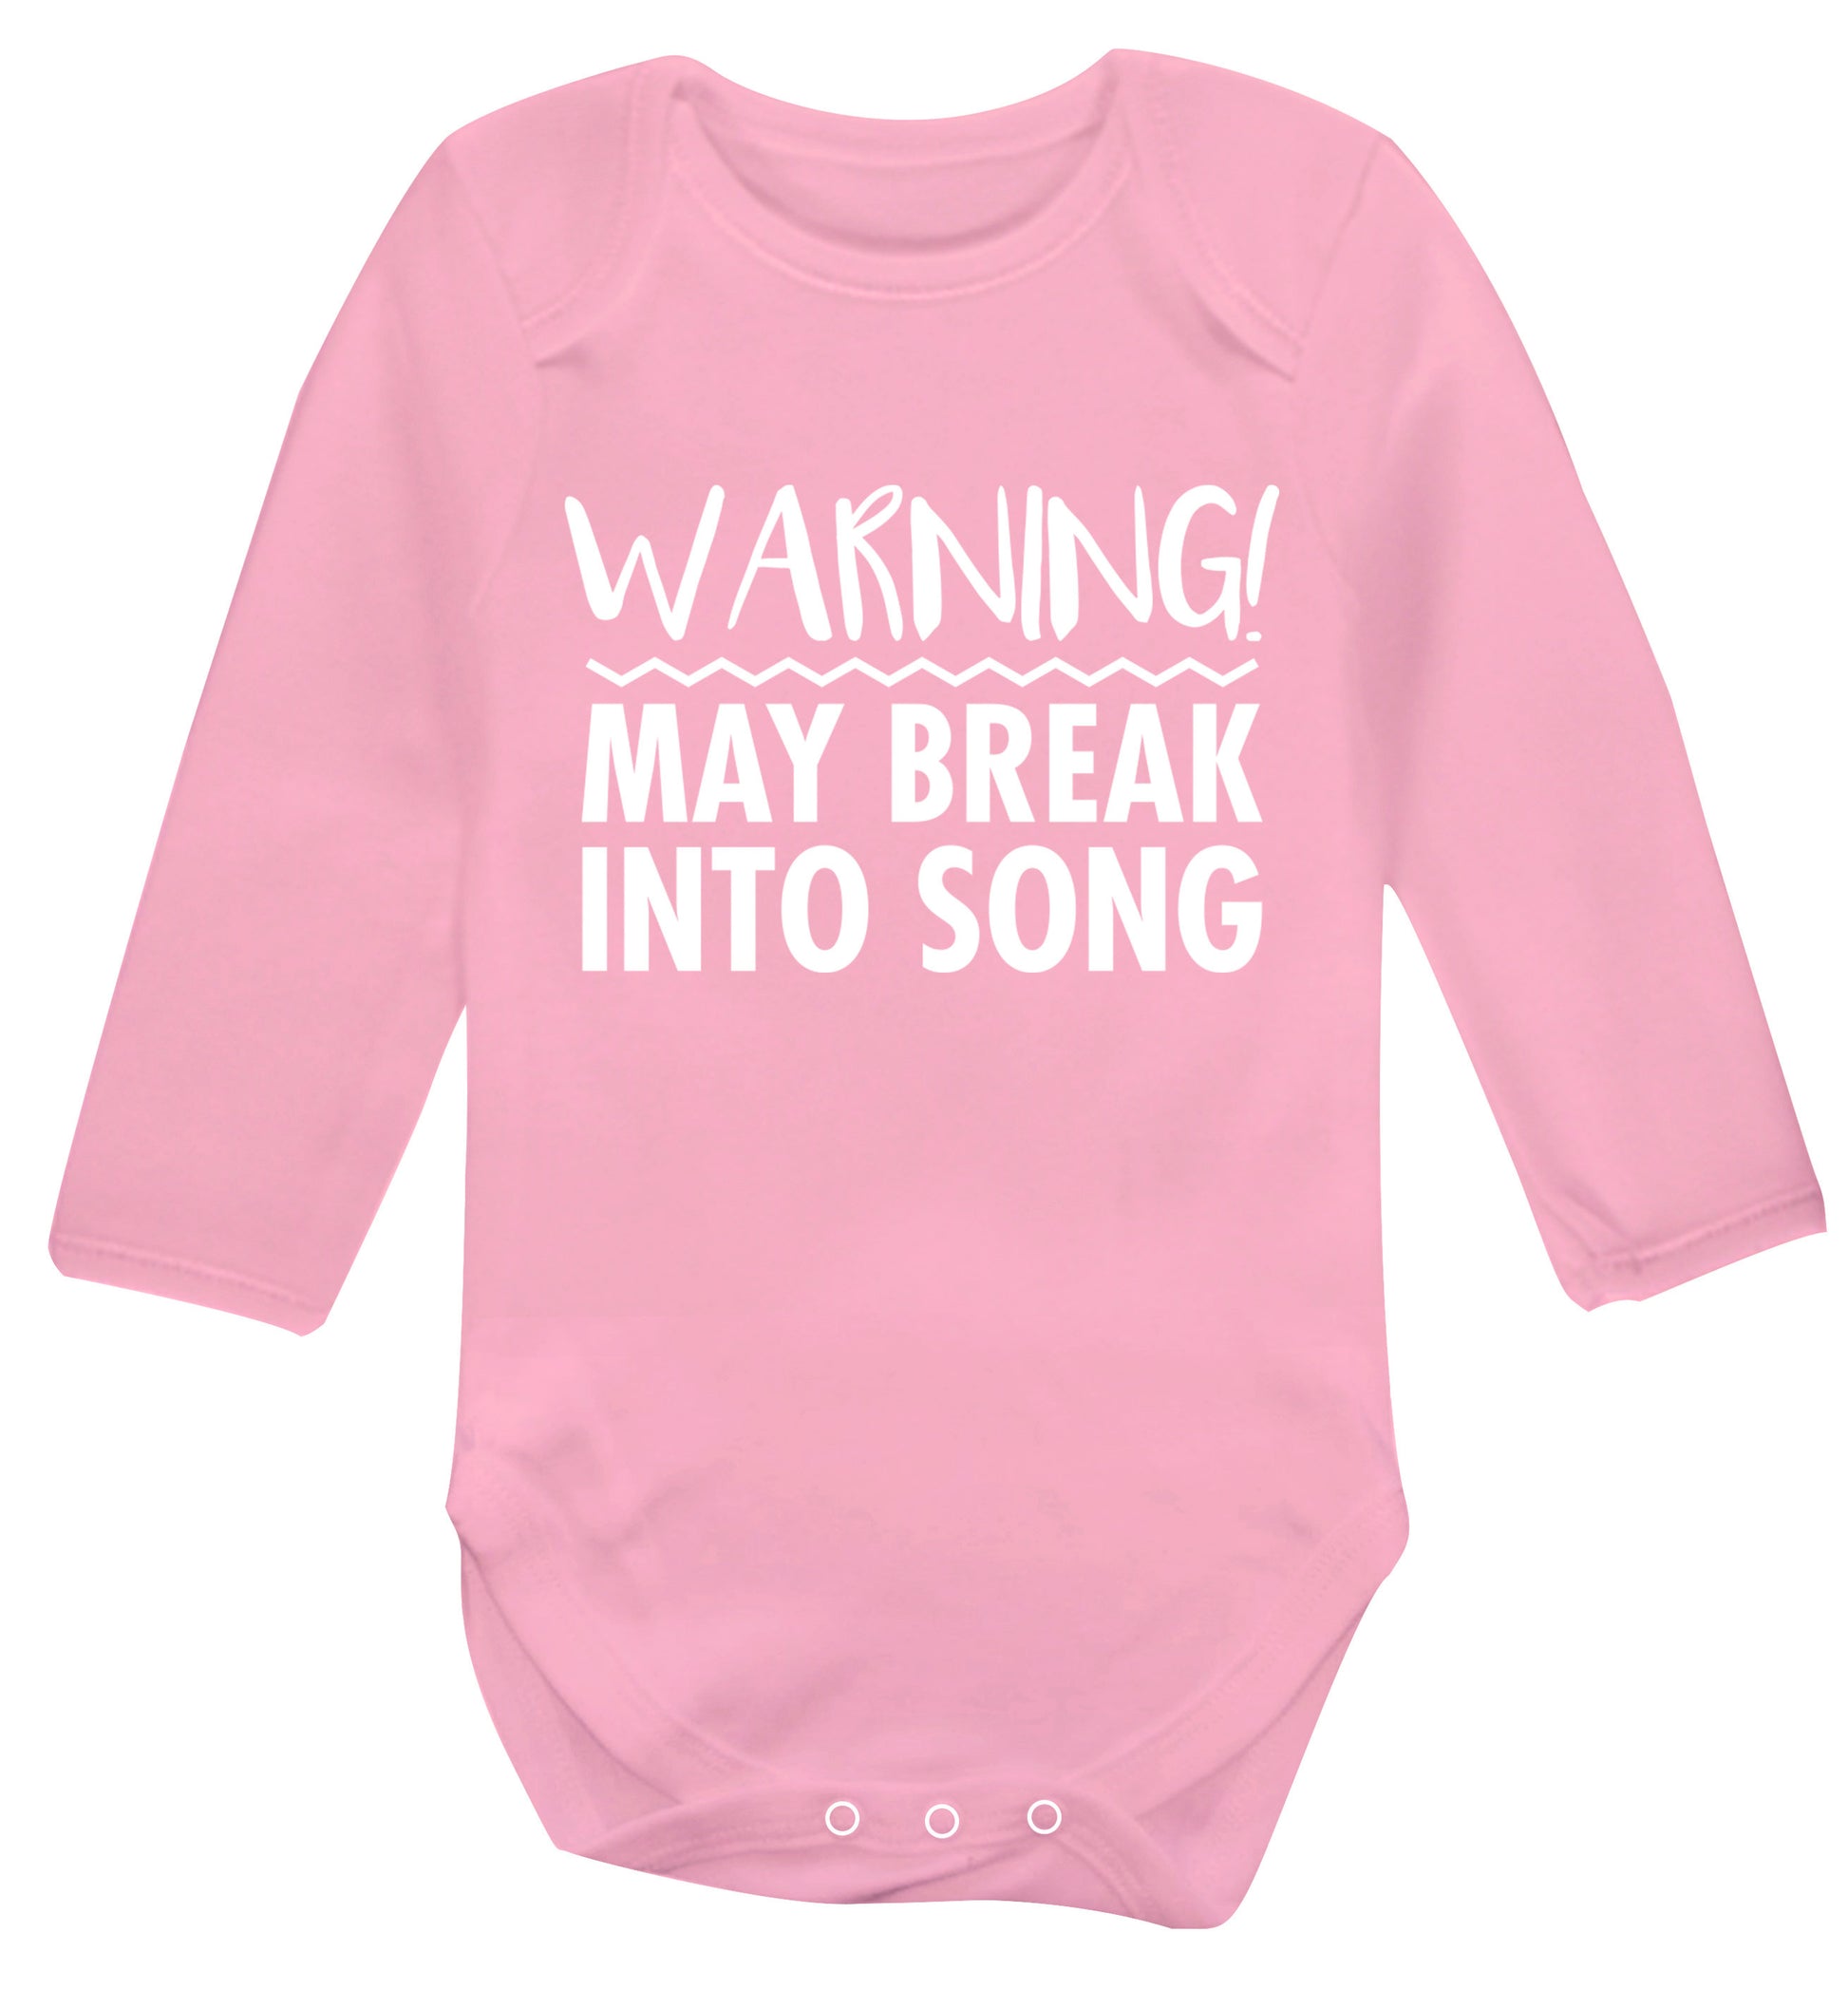 Warning may break into song Baby Vest long sleeved pale pink 6-12 months